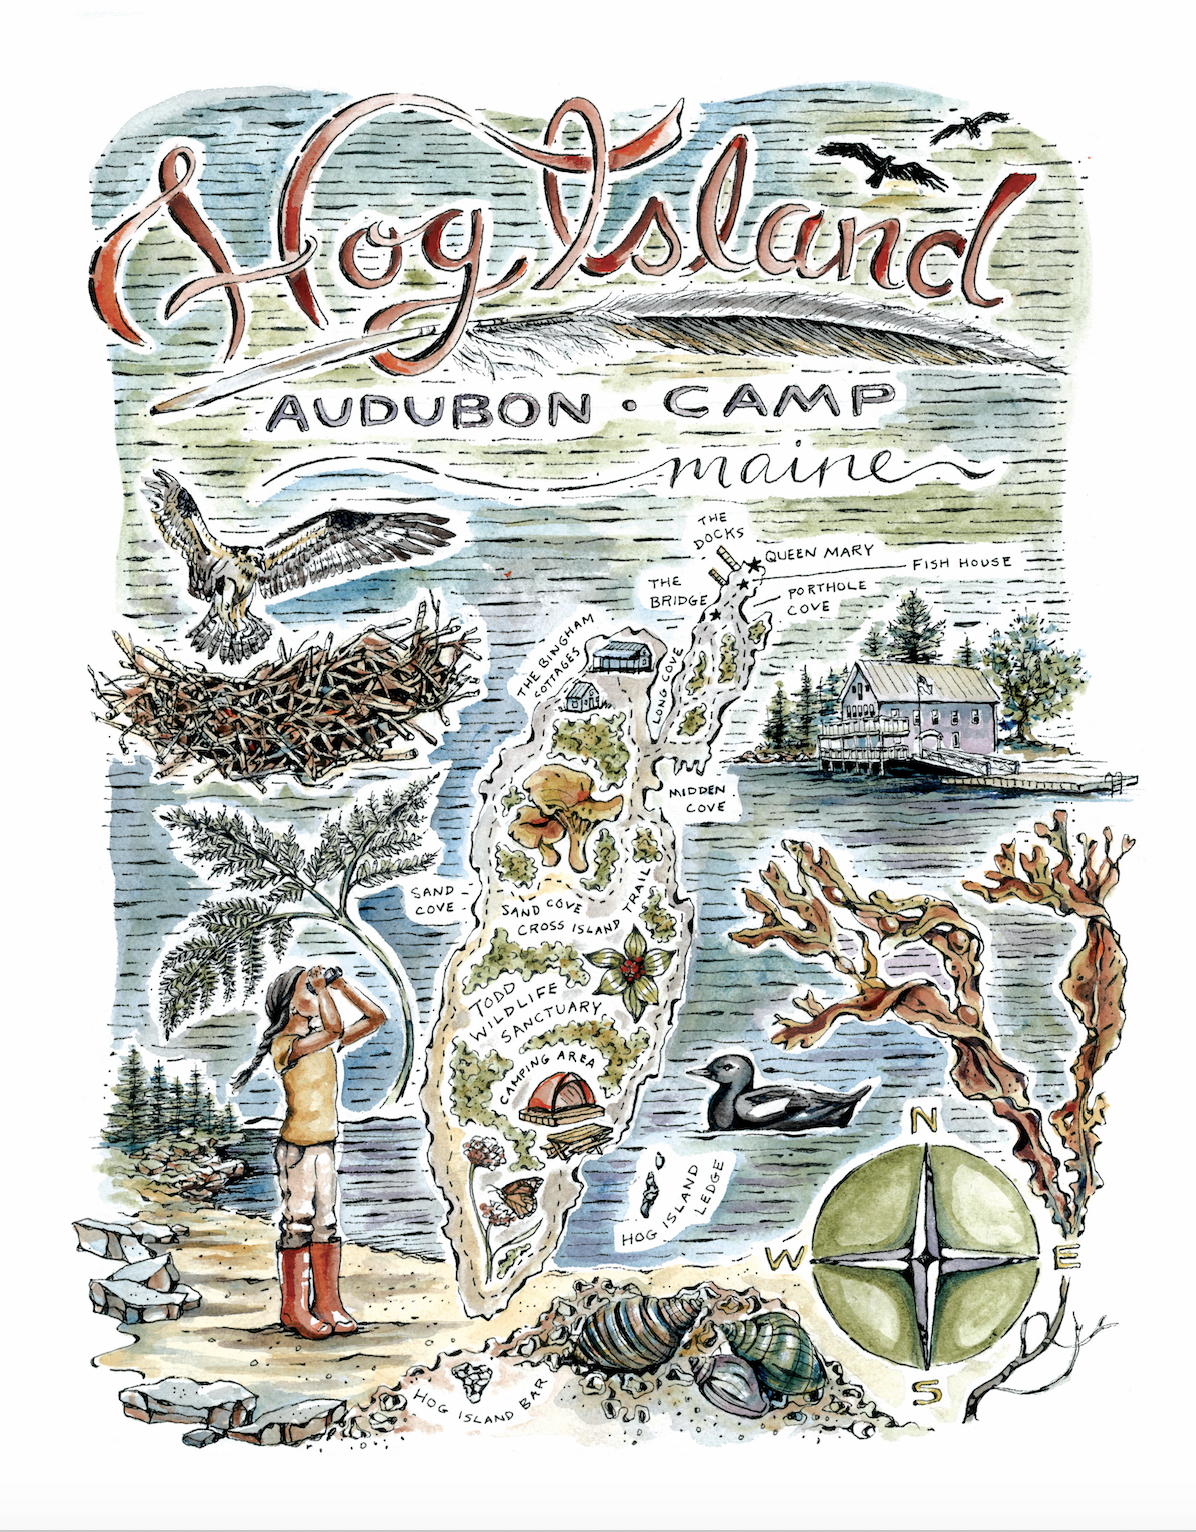 Created during my artist residency on Hog Island with the National Audubon Society in 2019